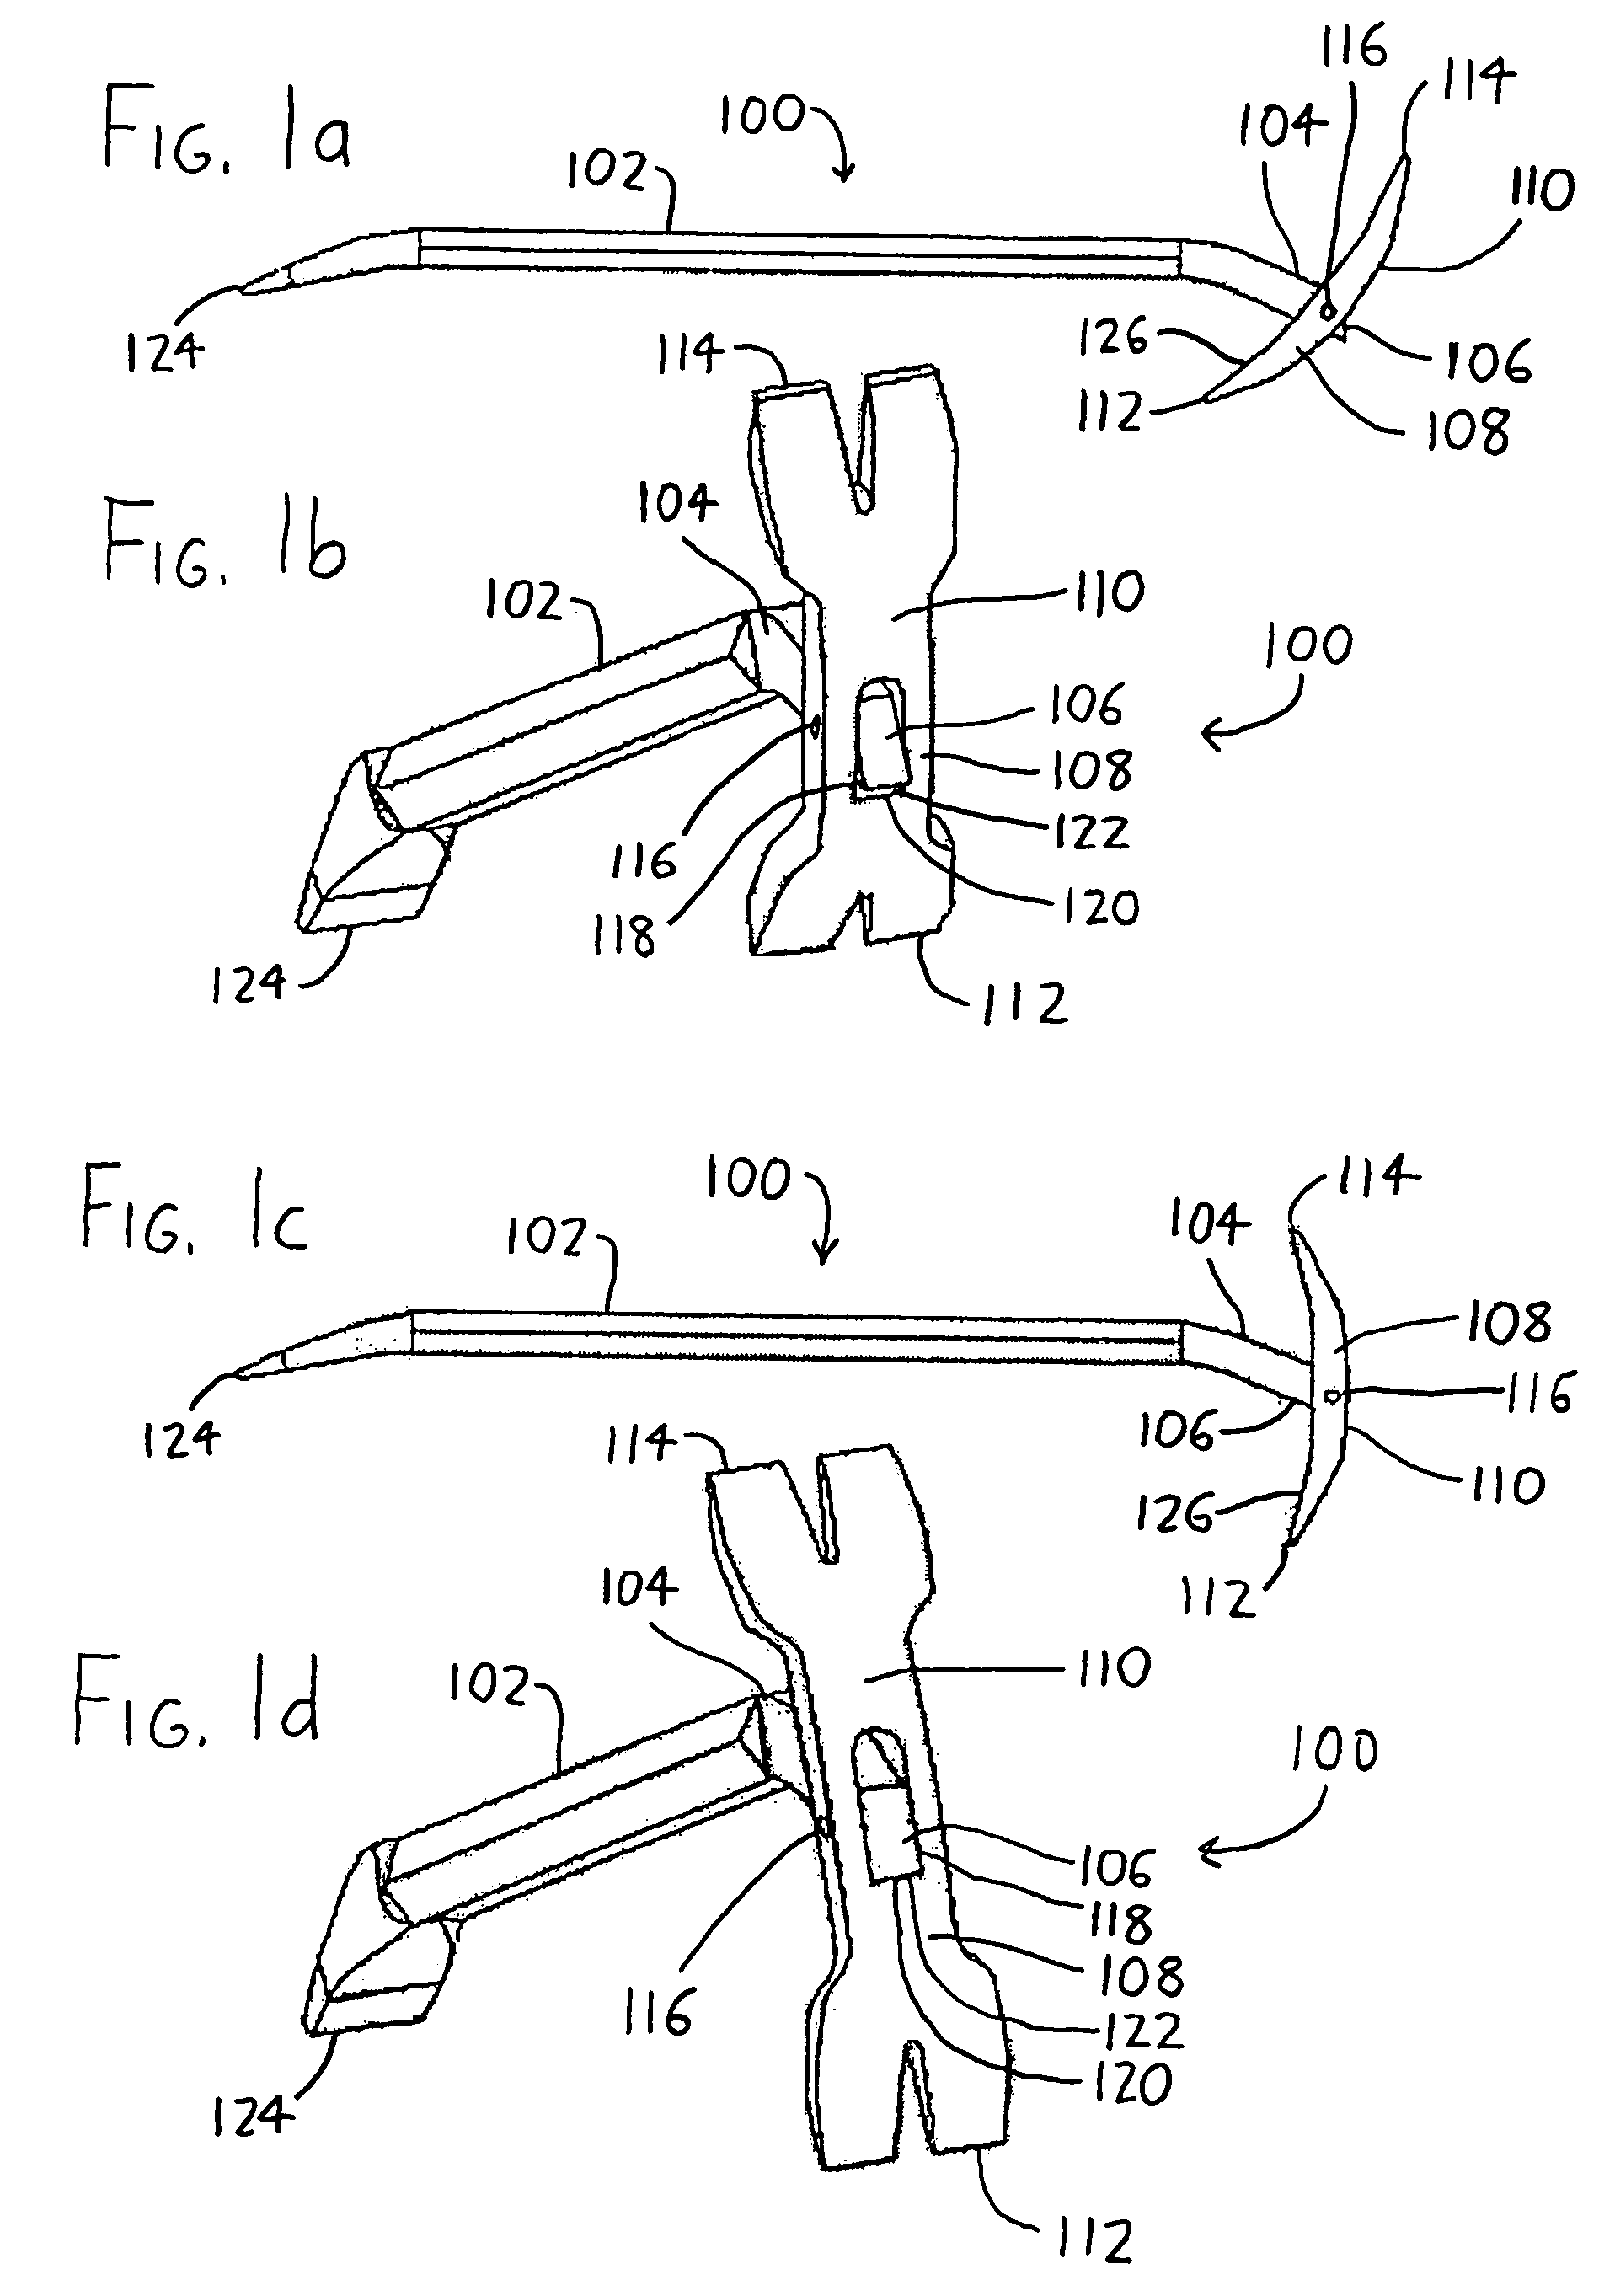 Tool for pulling nails and other protrusions